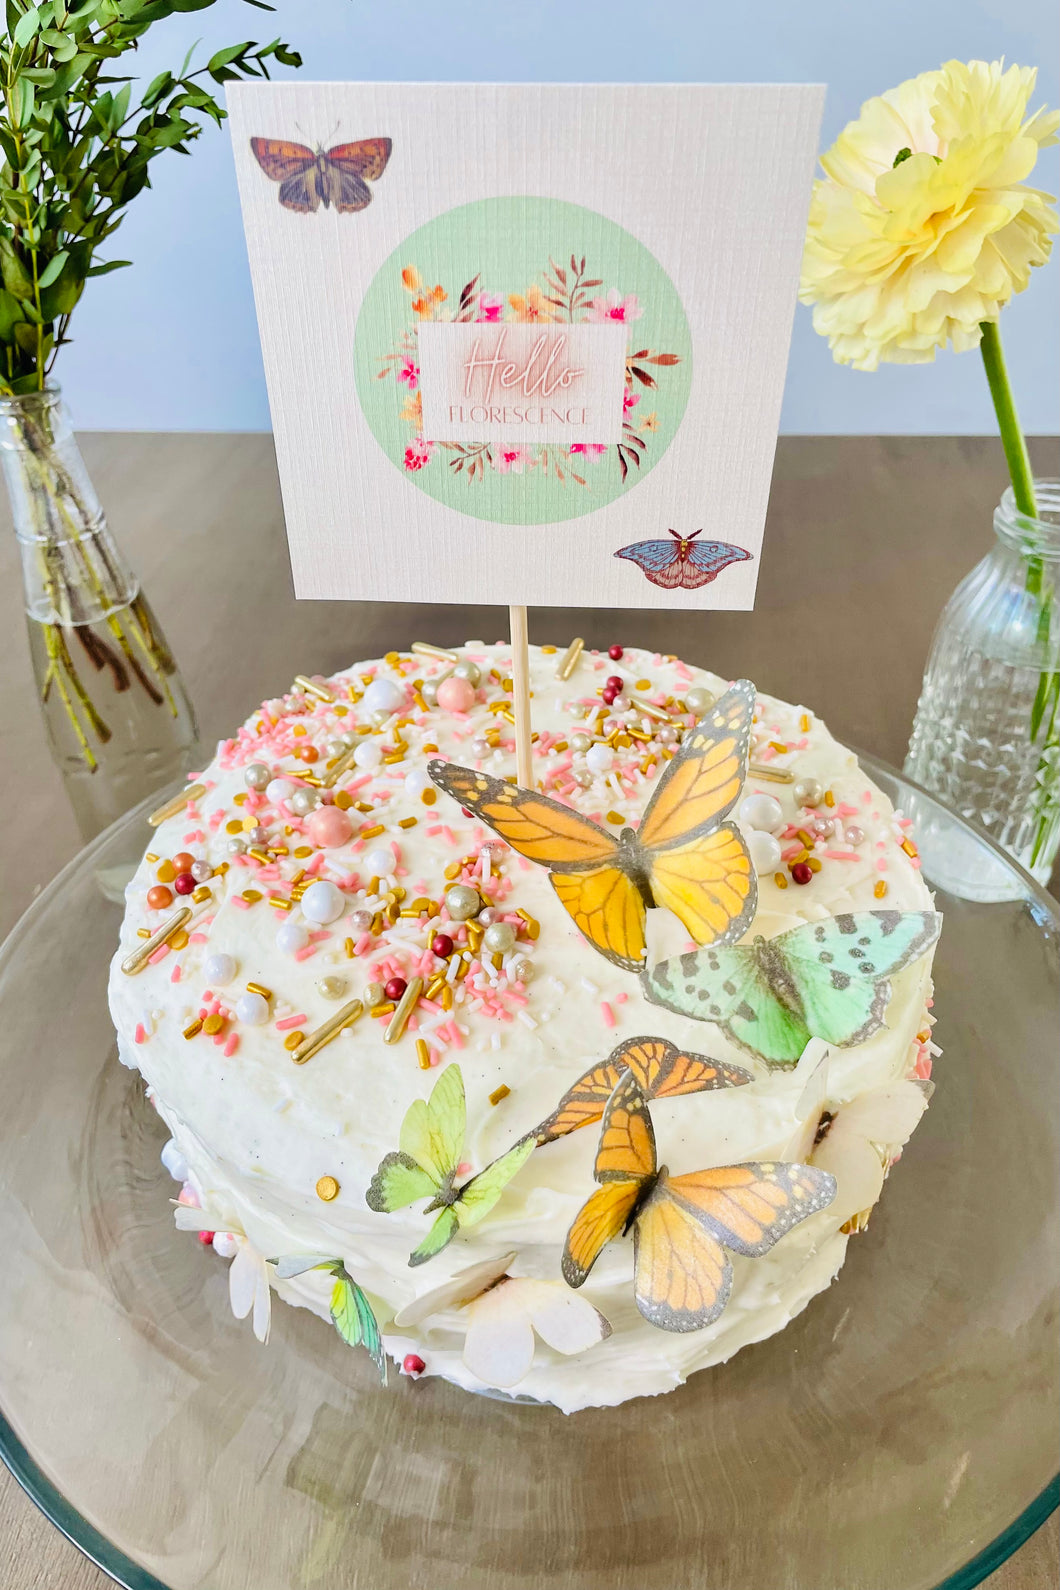 Hello Florescence Southern Style Sweet Carrot Cake Kit